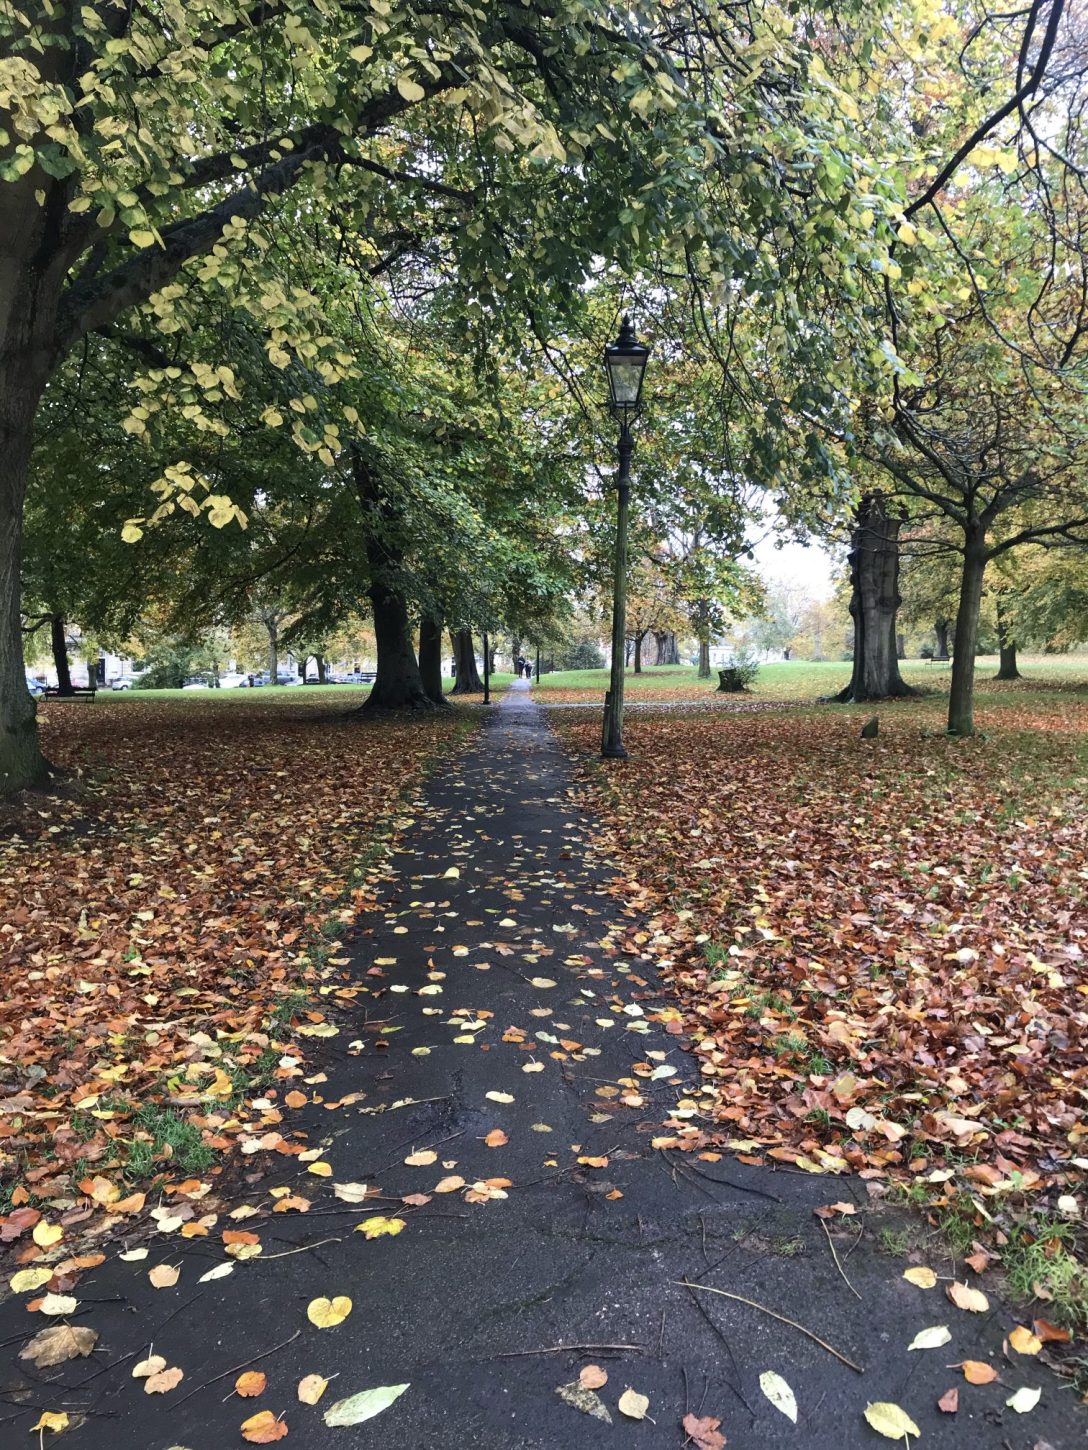 A path covered in fallen golden leaves leading towards greenish trees